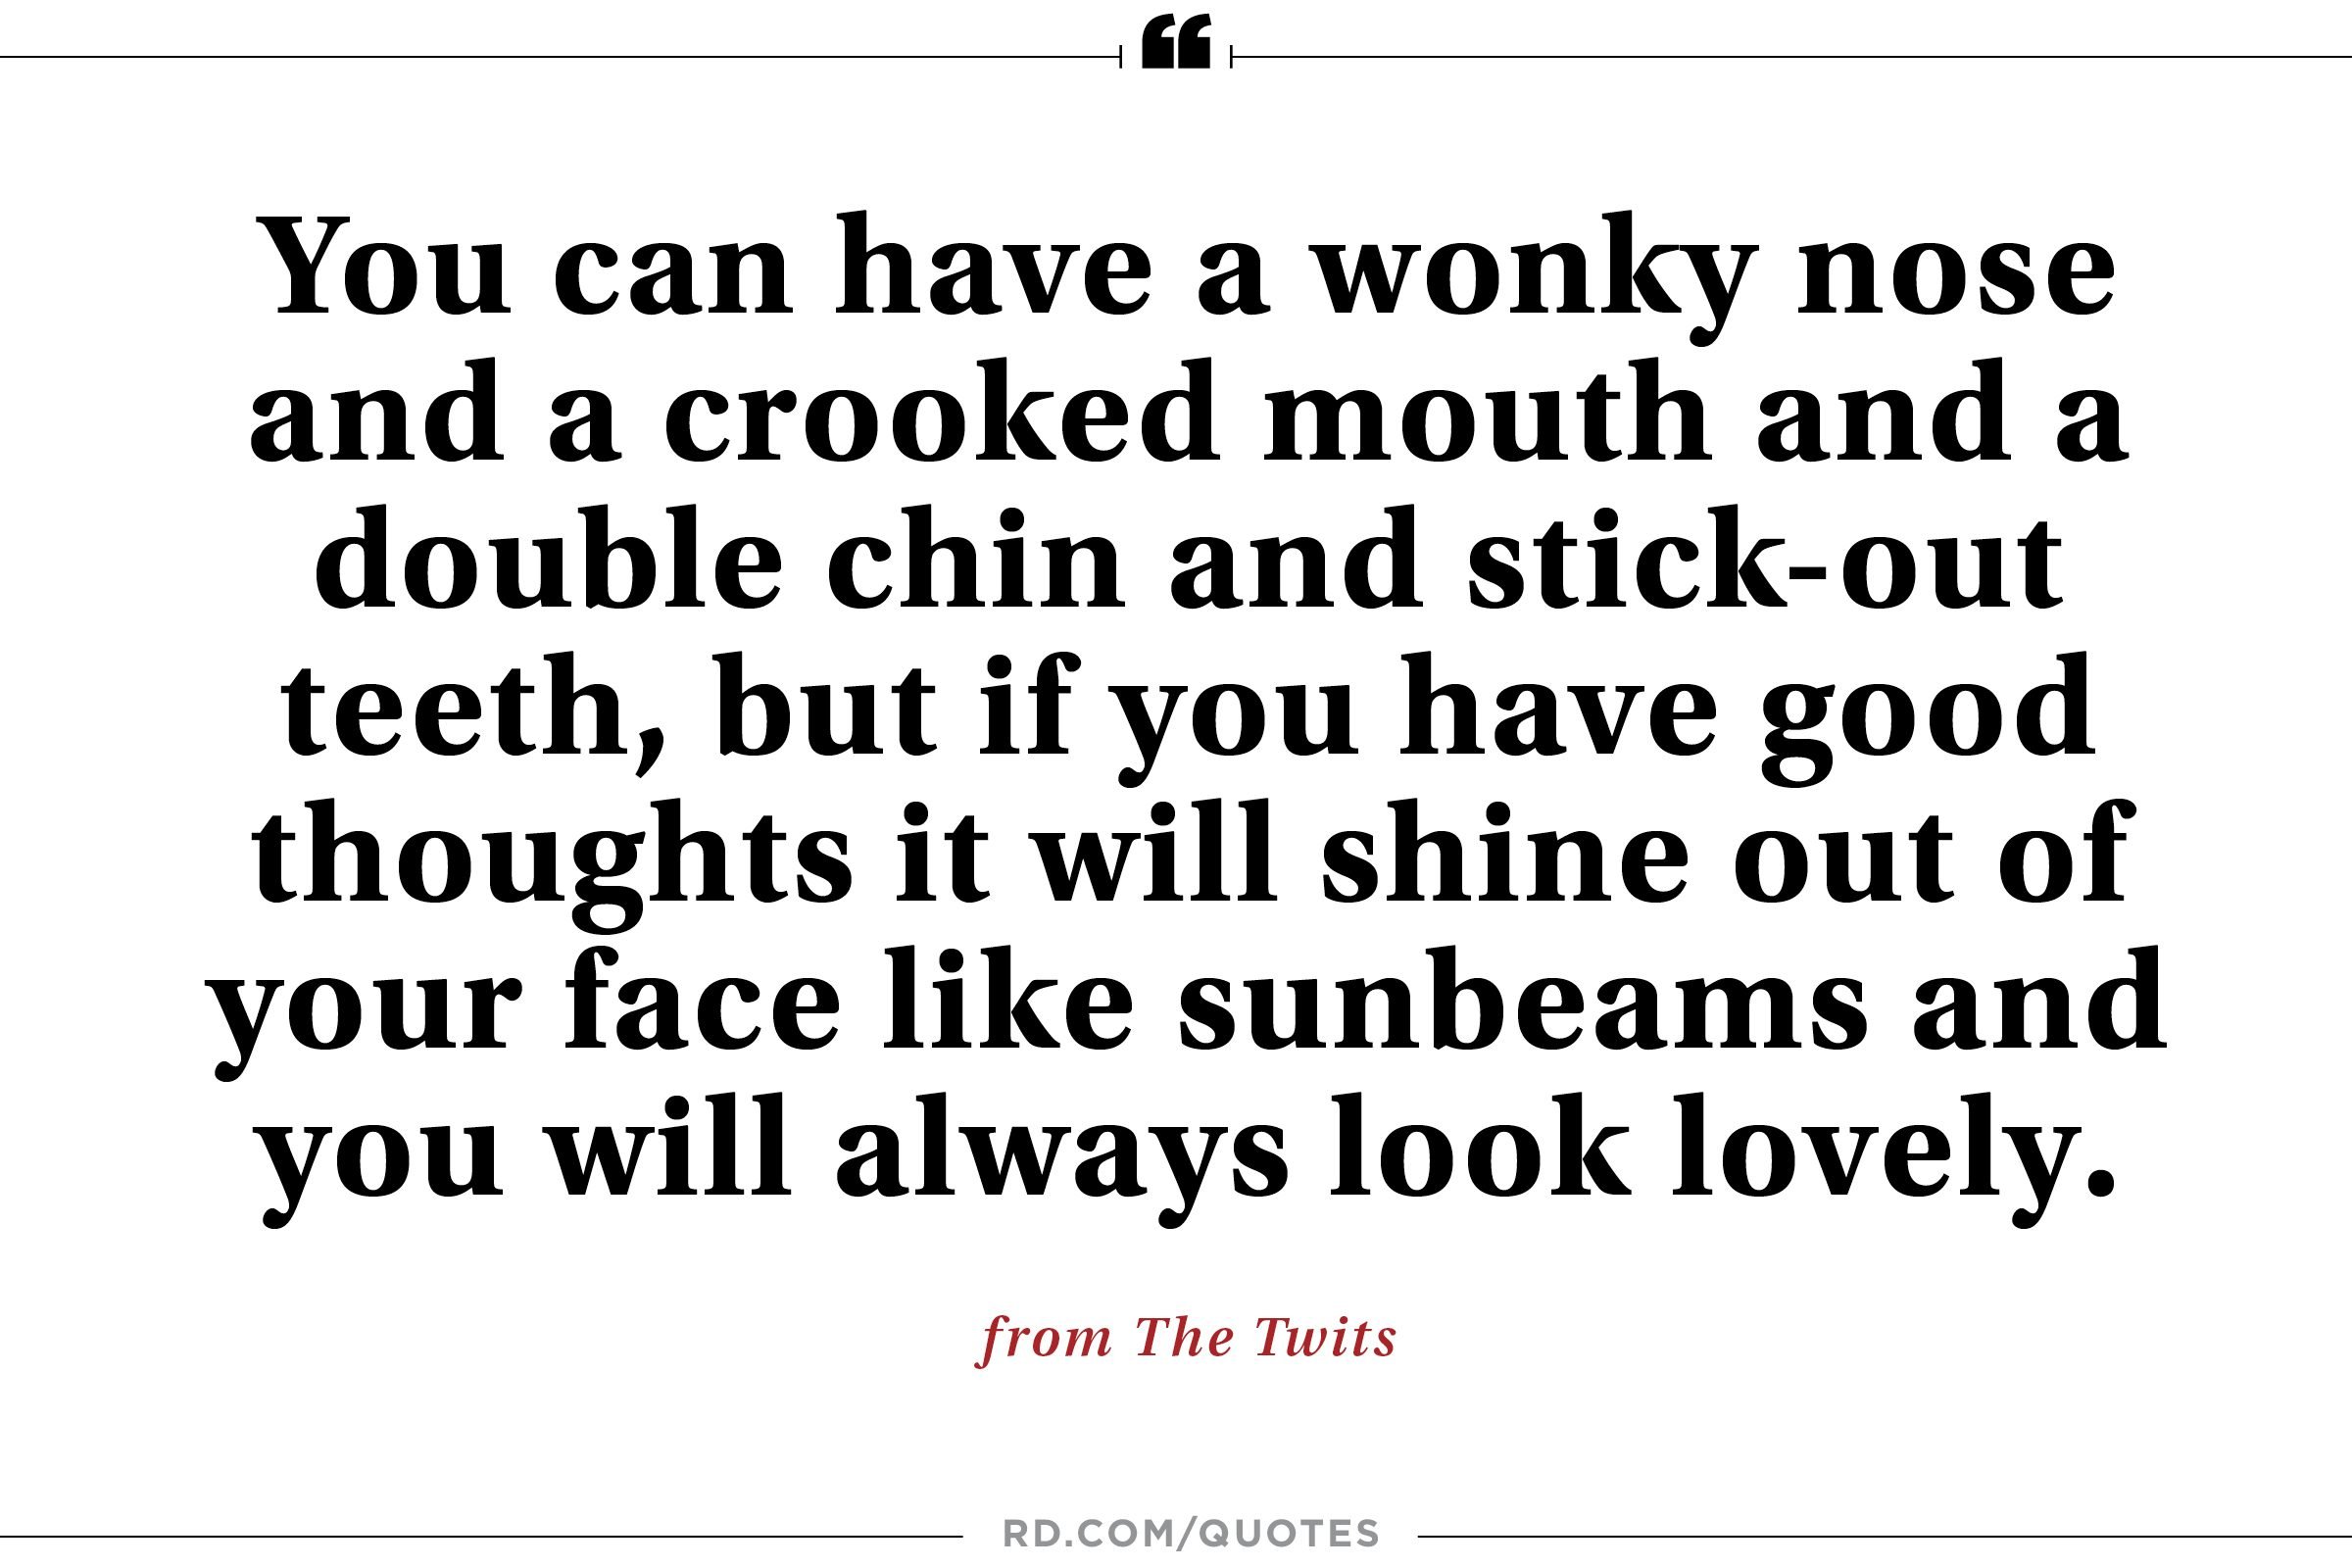 The Most Comforting Roald Dahl Quotes  Reader's Digest